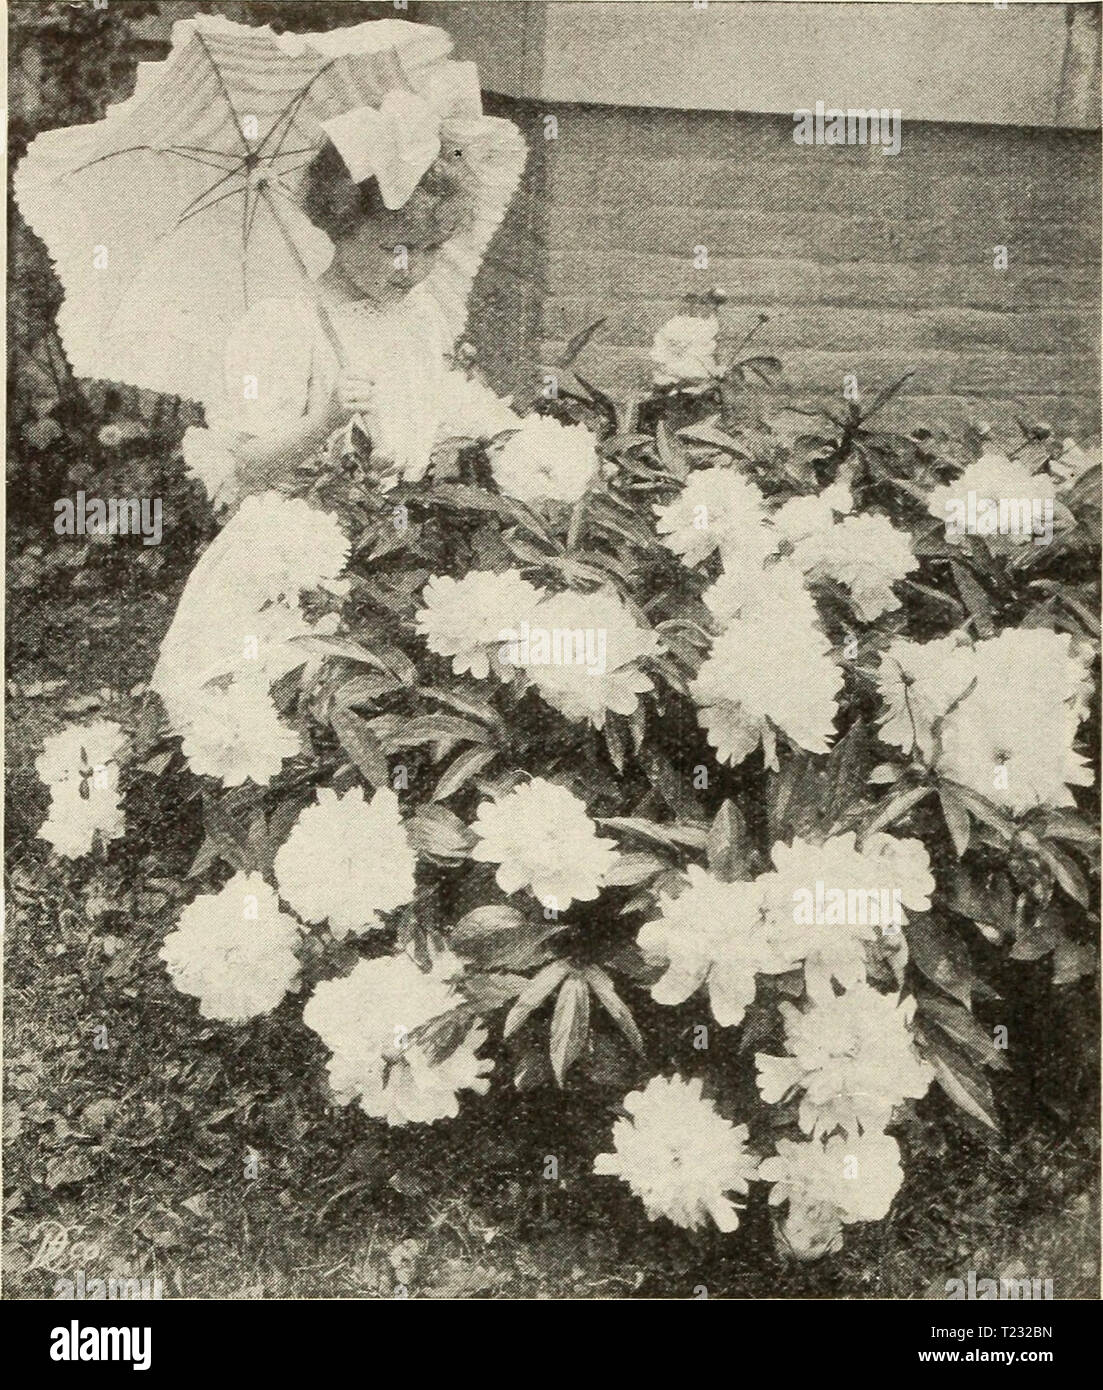 Archive image from page 79 of Dingee guide to rose culture Dingee guide to rose culture  dingeeguidetoros19ding 4 Year: 1913  p Dingee Hardy Peonies 'Peonies are the popular hardy plant of the day. Once planted they last practically forever. Hardy in the coldest climates. For single specimens and cemetery planting, they are unexcelled. We offer the finest varieties.' New and Rare Peonies Price, strong roots, 50 cts. each. Set of 8 superb varieties postpaid for $3.25. Edulis Superba. Red Faust. Delicate light pink. Felix Crousse. Brilliant red. Extra fine. Humei Carnea. Light rose, passing into Stock Photo